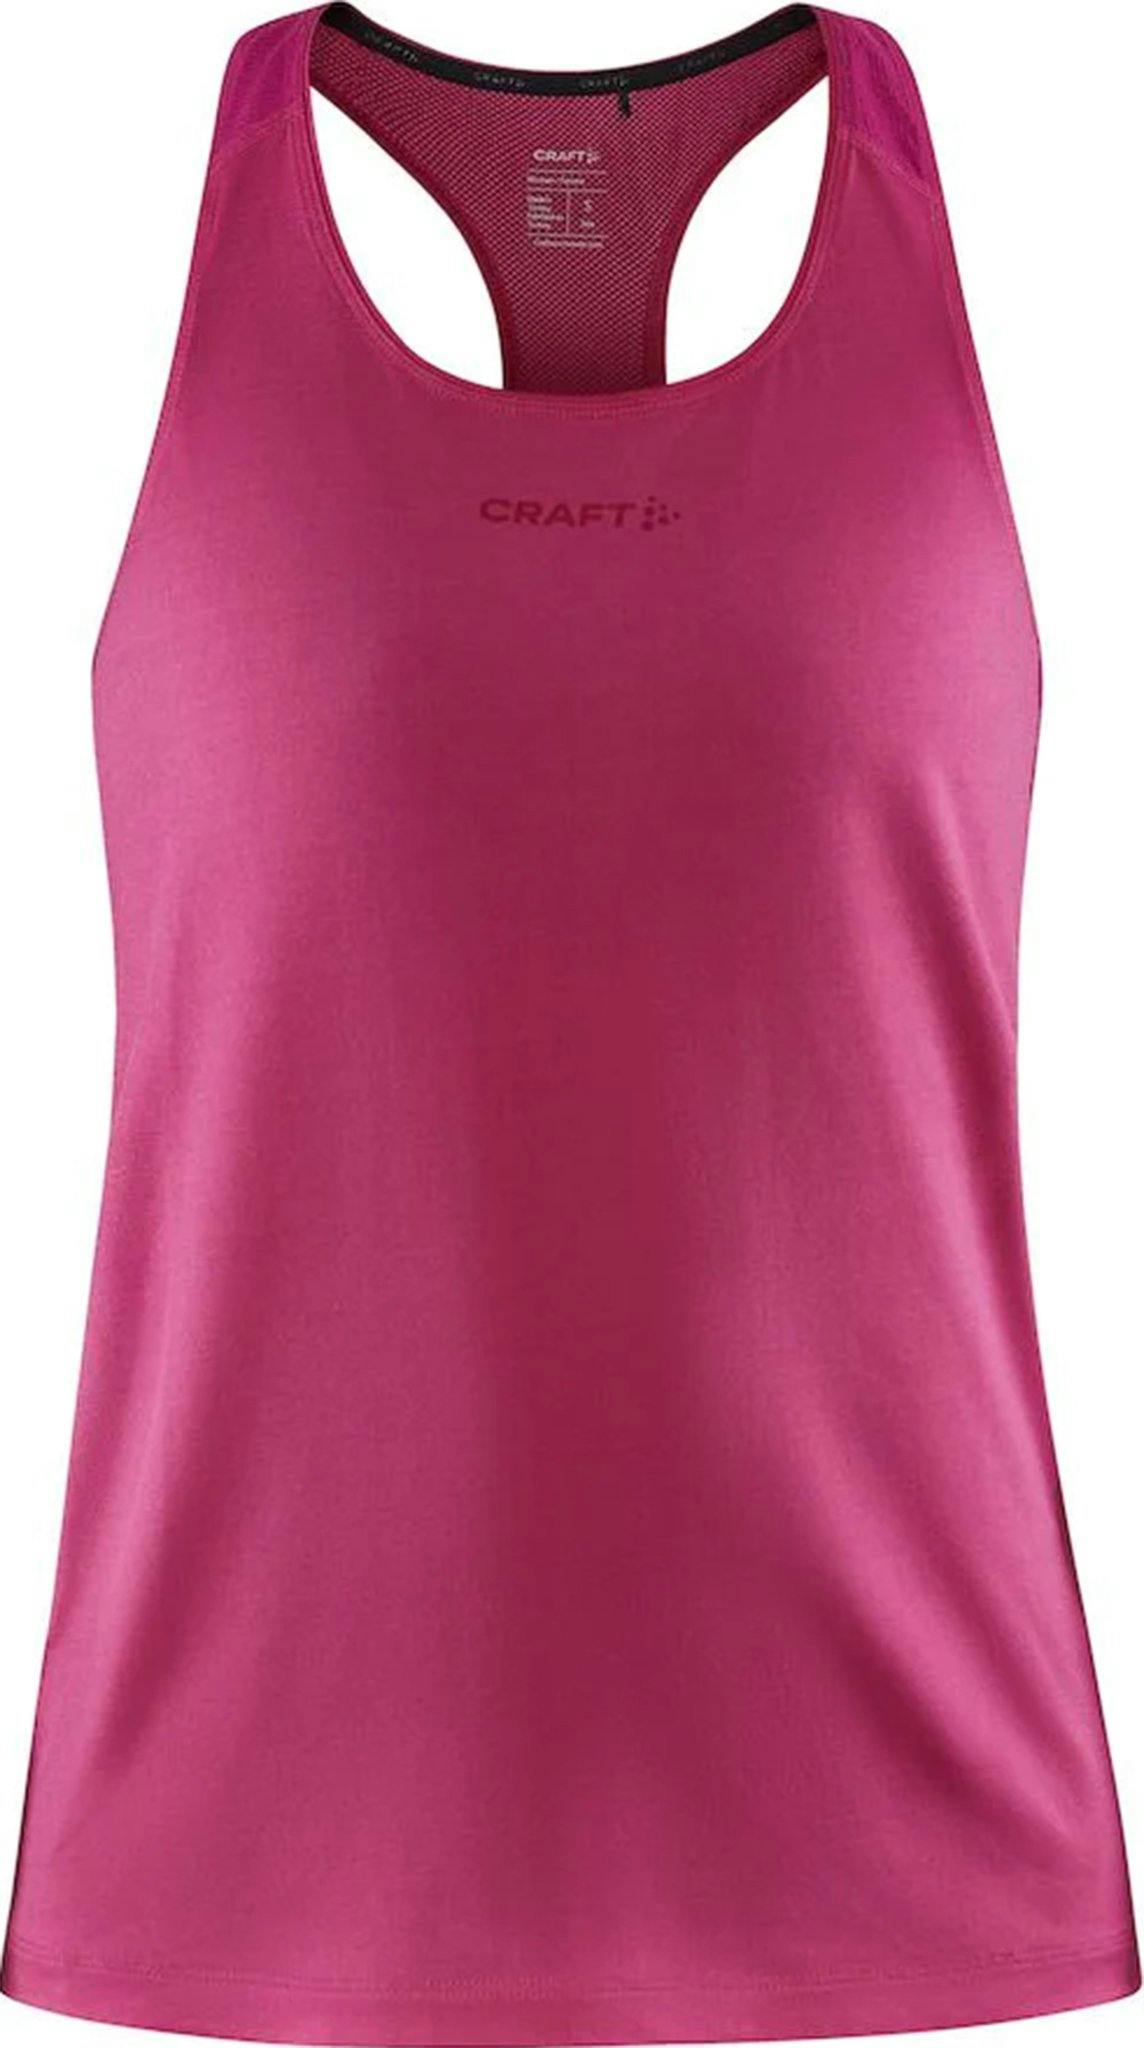 Product image for ADV Essence Singlet - Women's